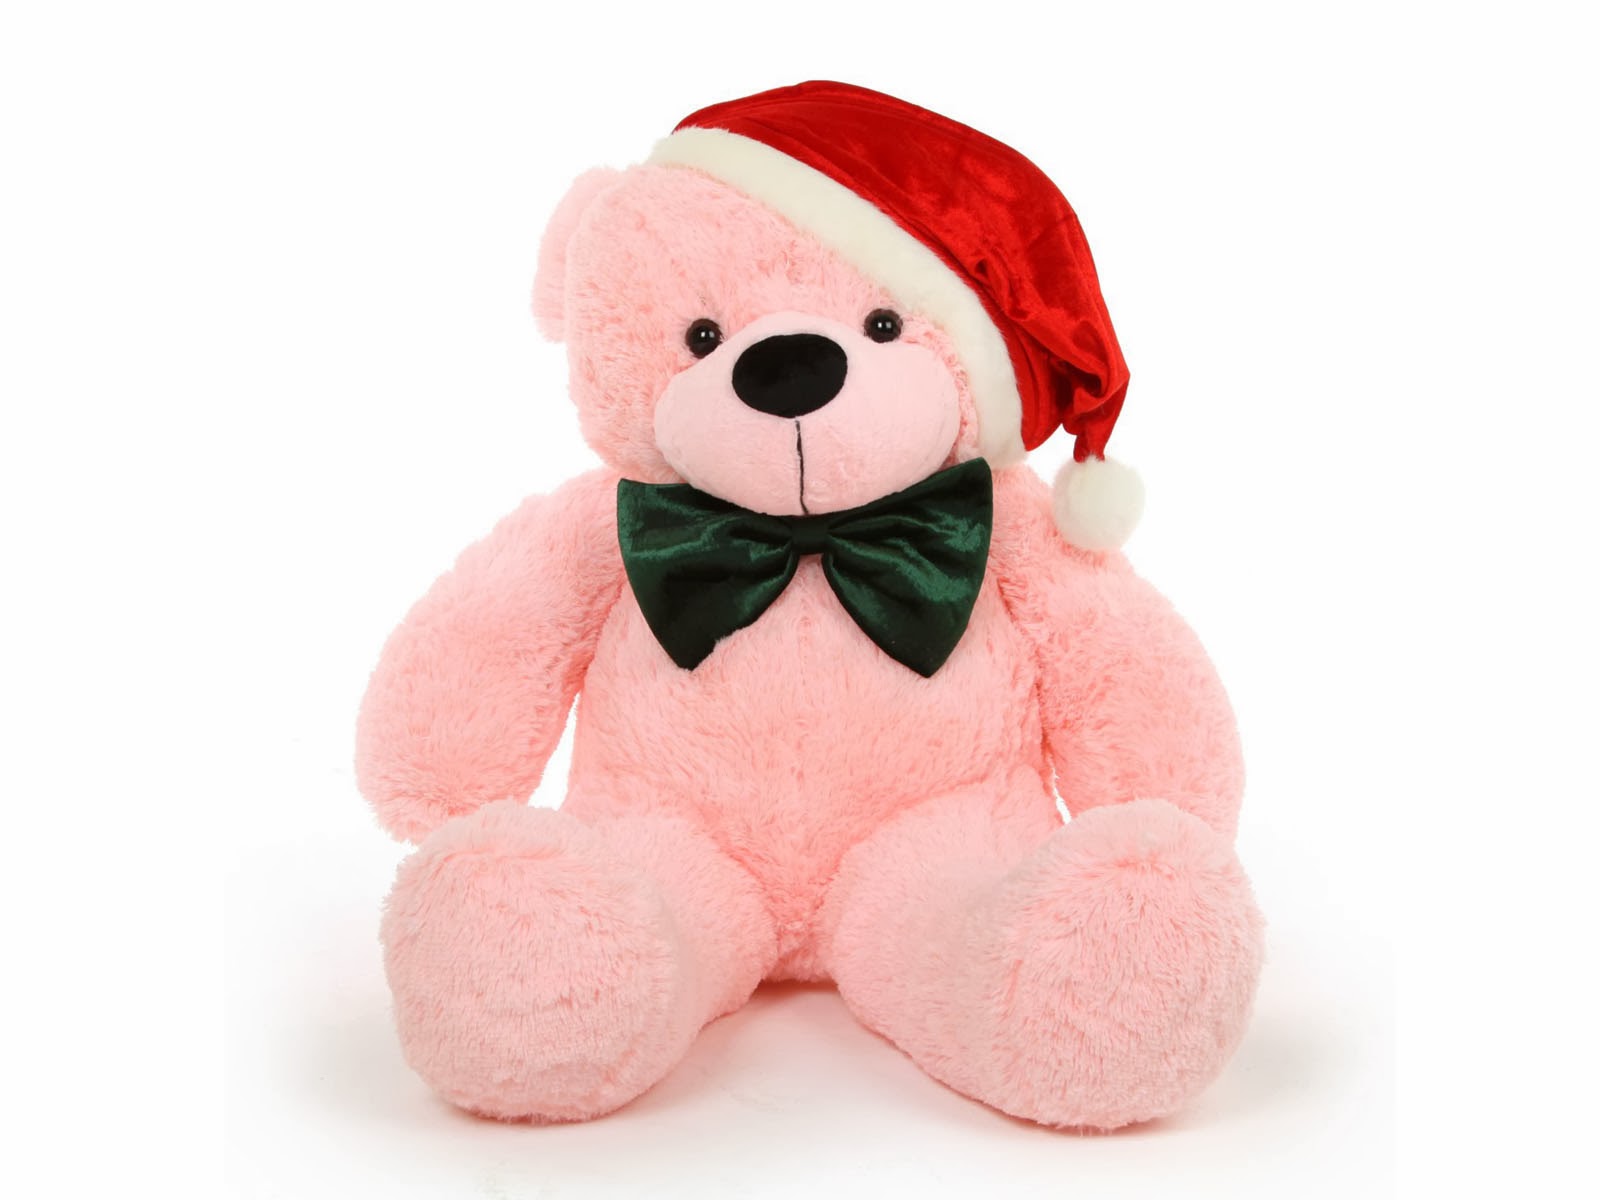 Cute Teddy Bear Pictures HD Images Free Download Desktop